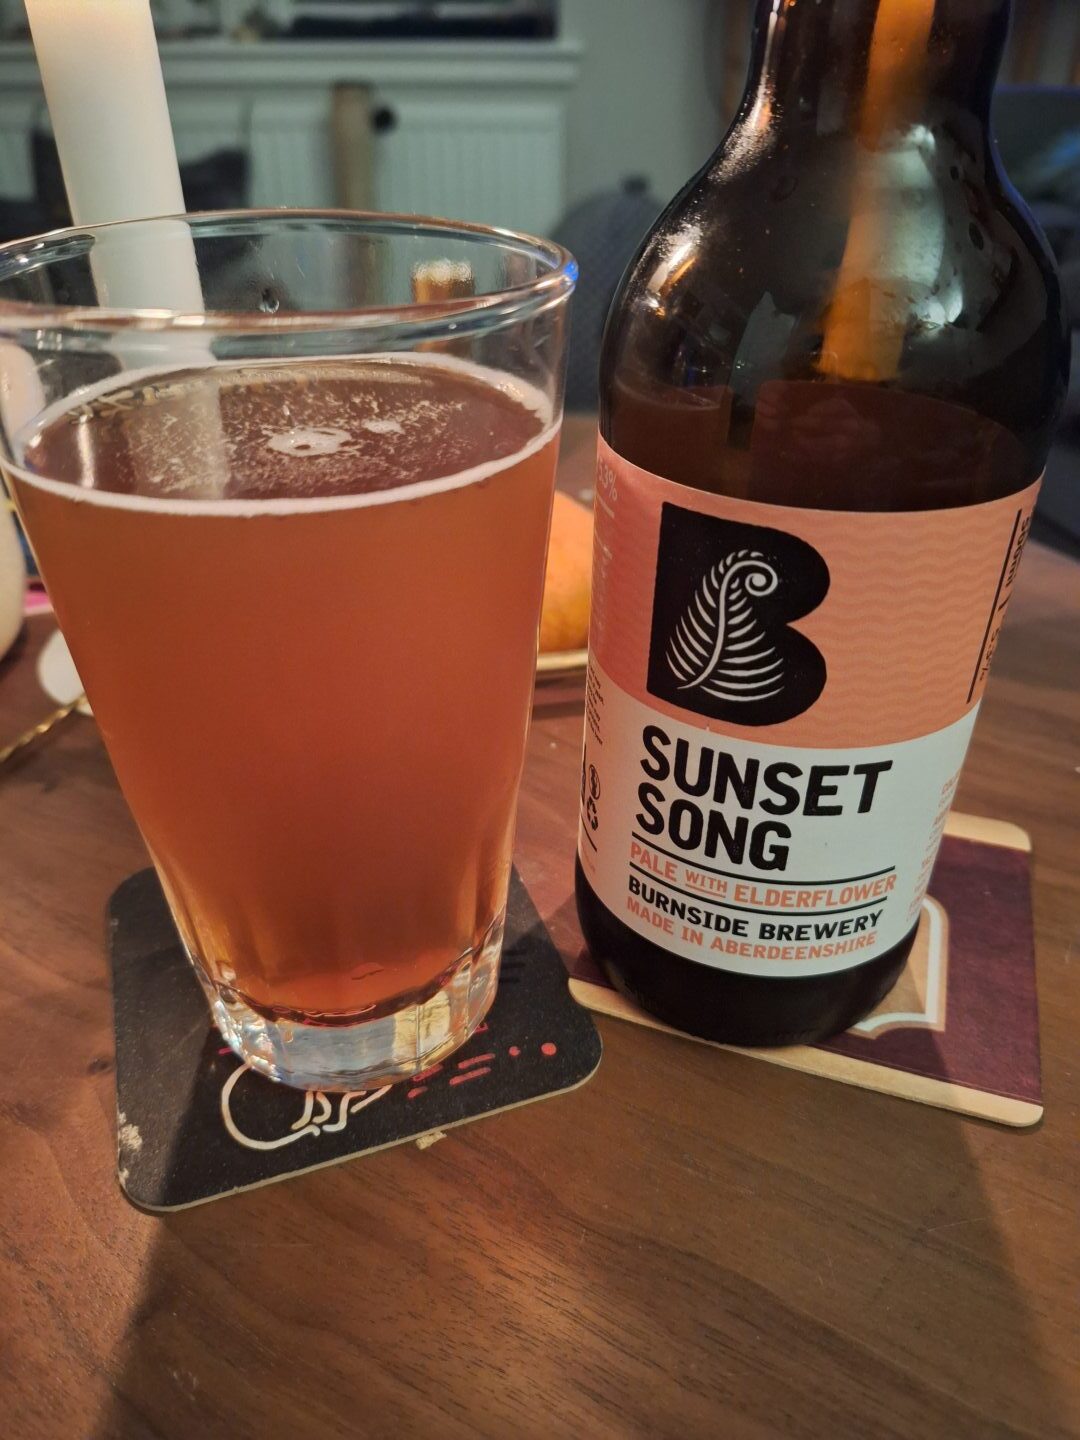 A bottle of Sunset Song from Burnside Brewery poured into a glass